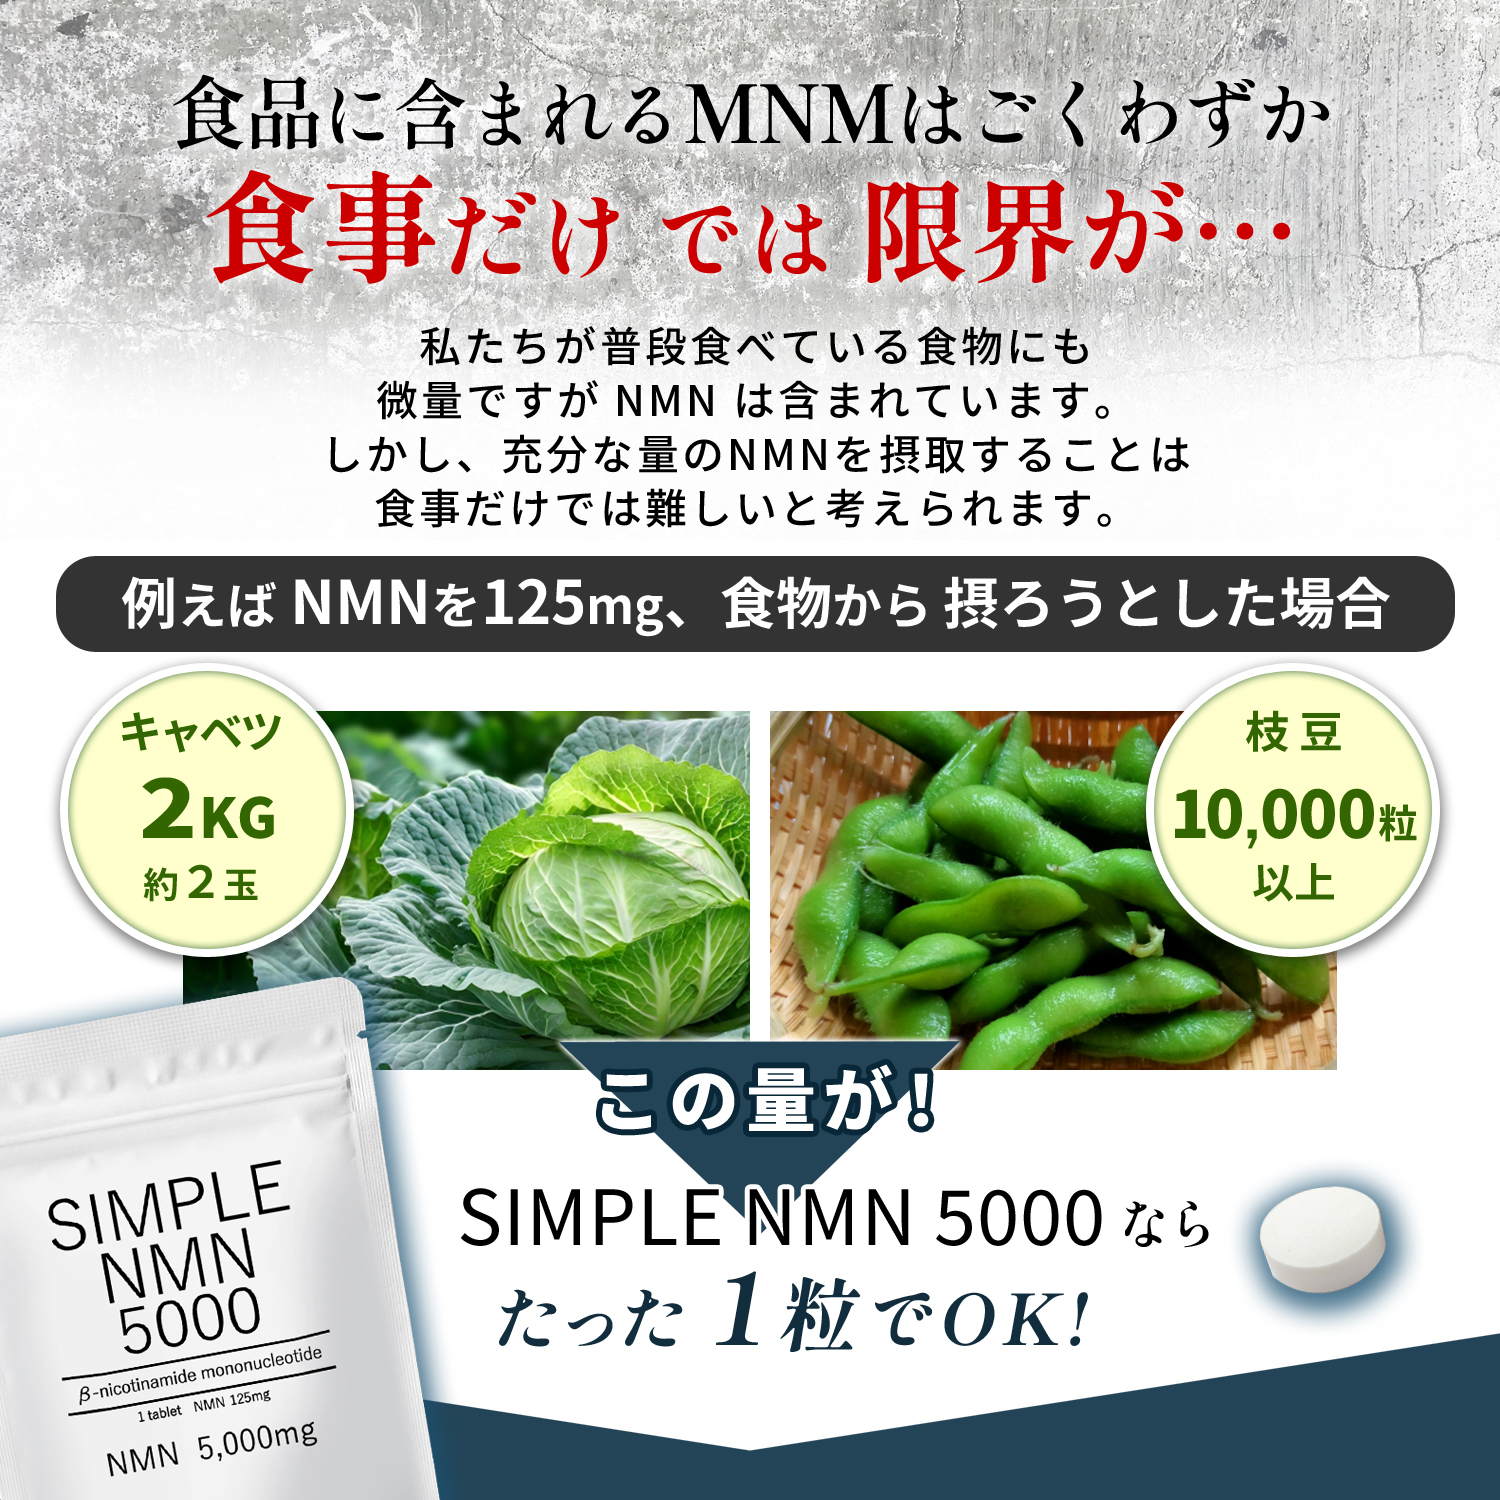 NMN supplement made in Japan 5000mg vitamin B group supplement nmn supplement domestic production vitamin supplement single goods 40 bead high purity 100% beauty 